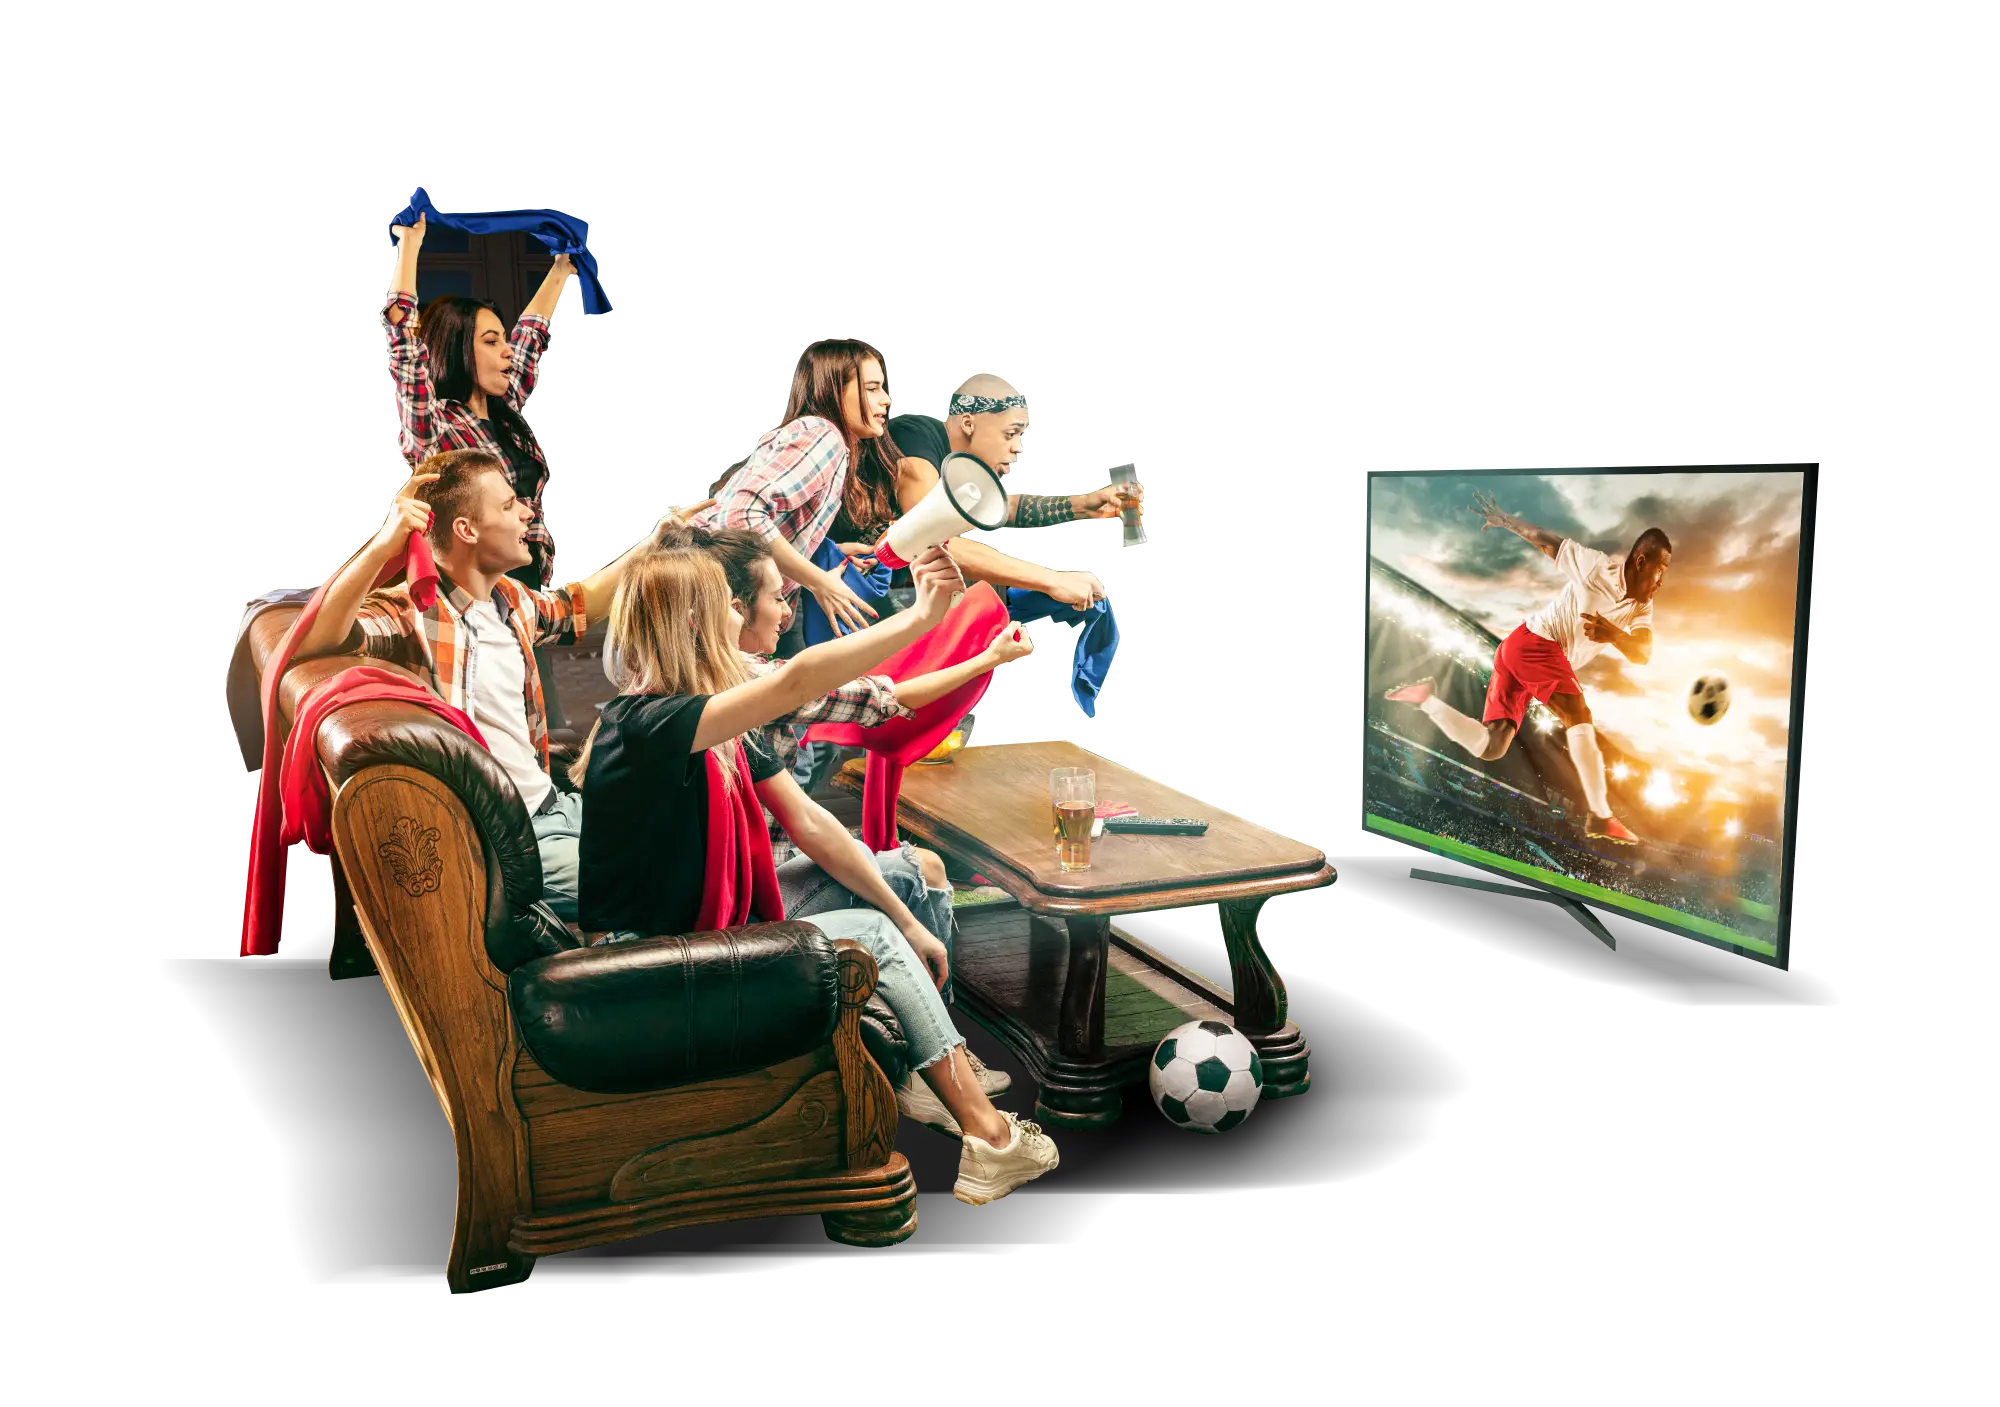 A group of enthusiastic people are sitting on a couch, intensely watching a soccer match on a large TV screen. They are cheering, waving scarves, and pointing at the screen, with a soccer ball on the floor and drinks on the coffee table.